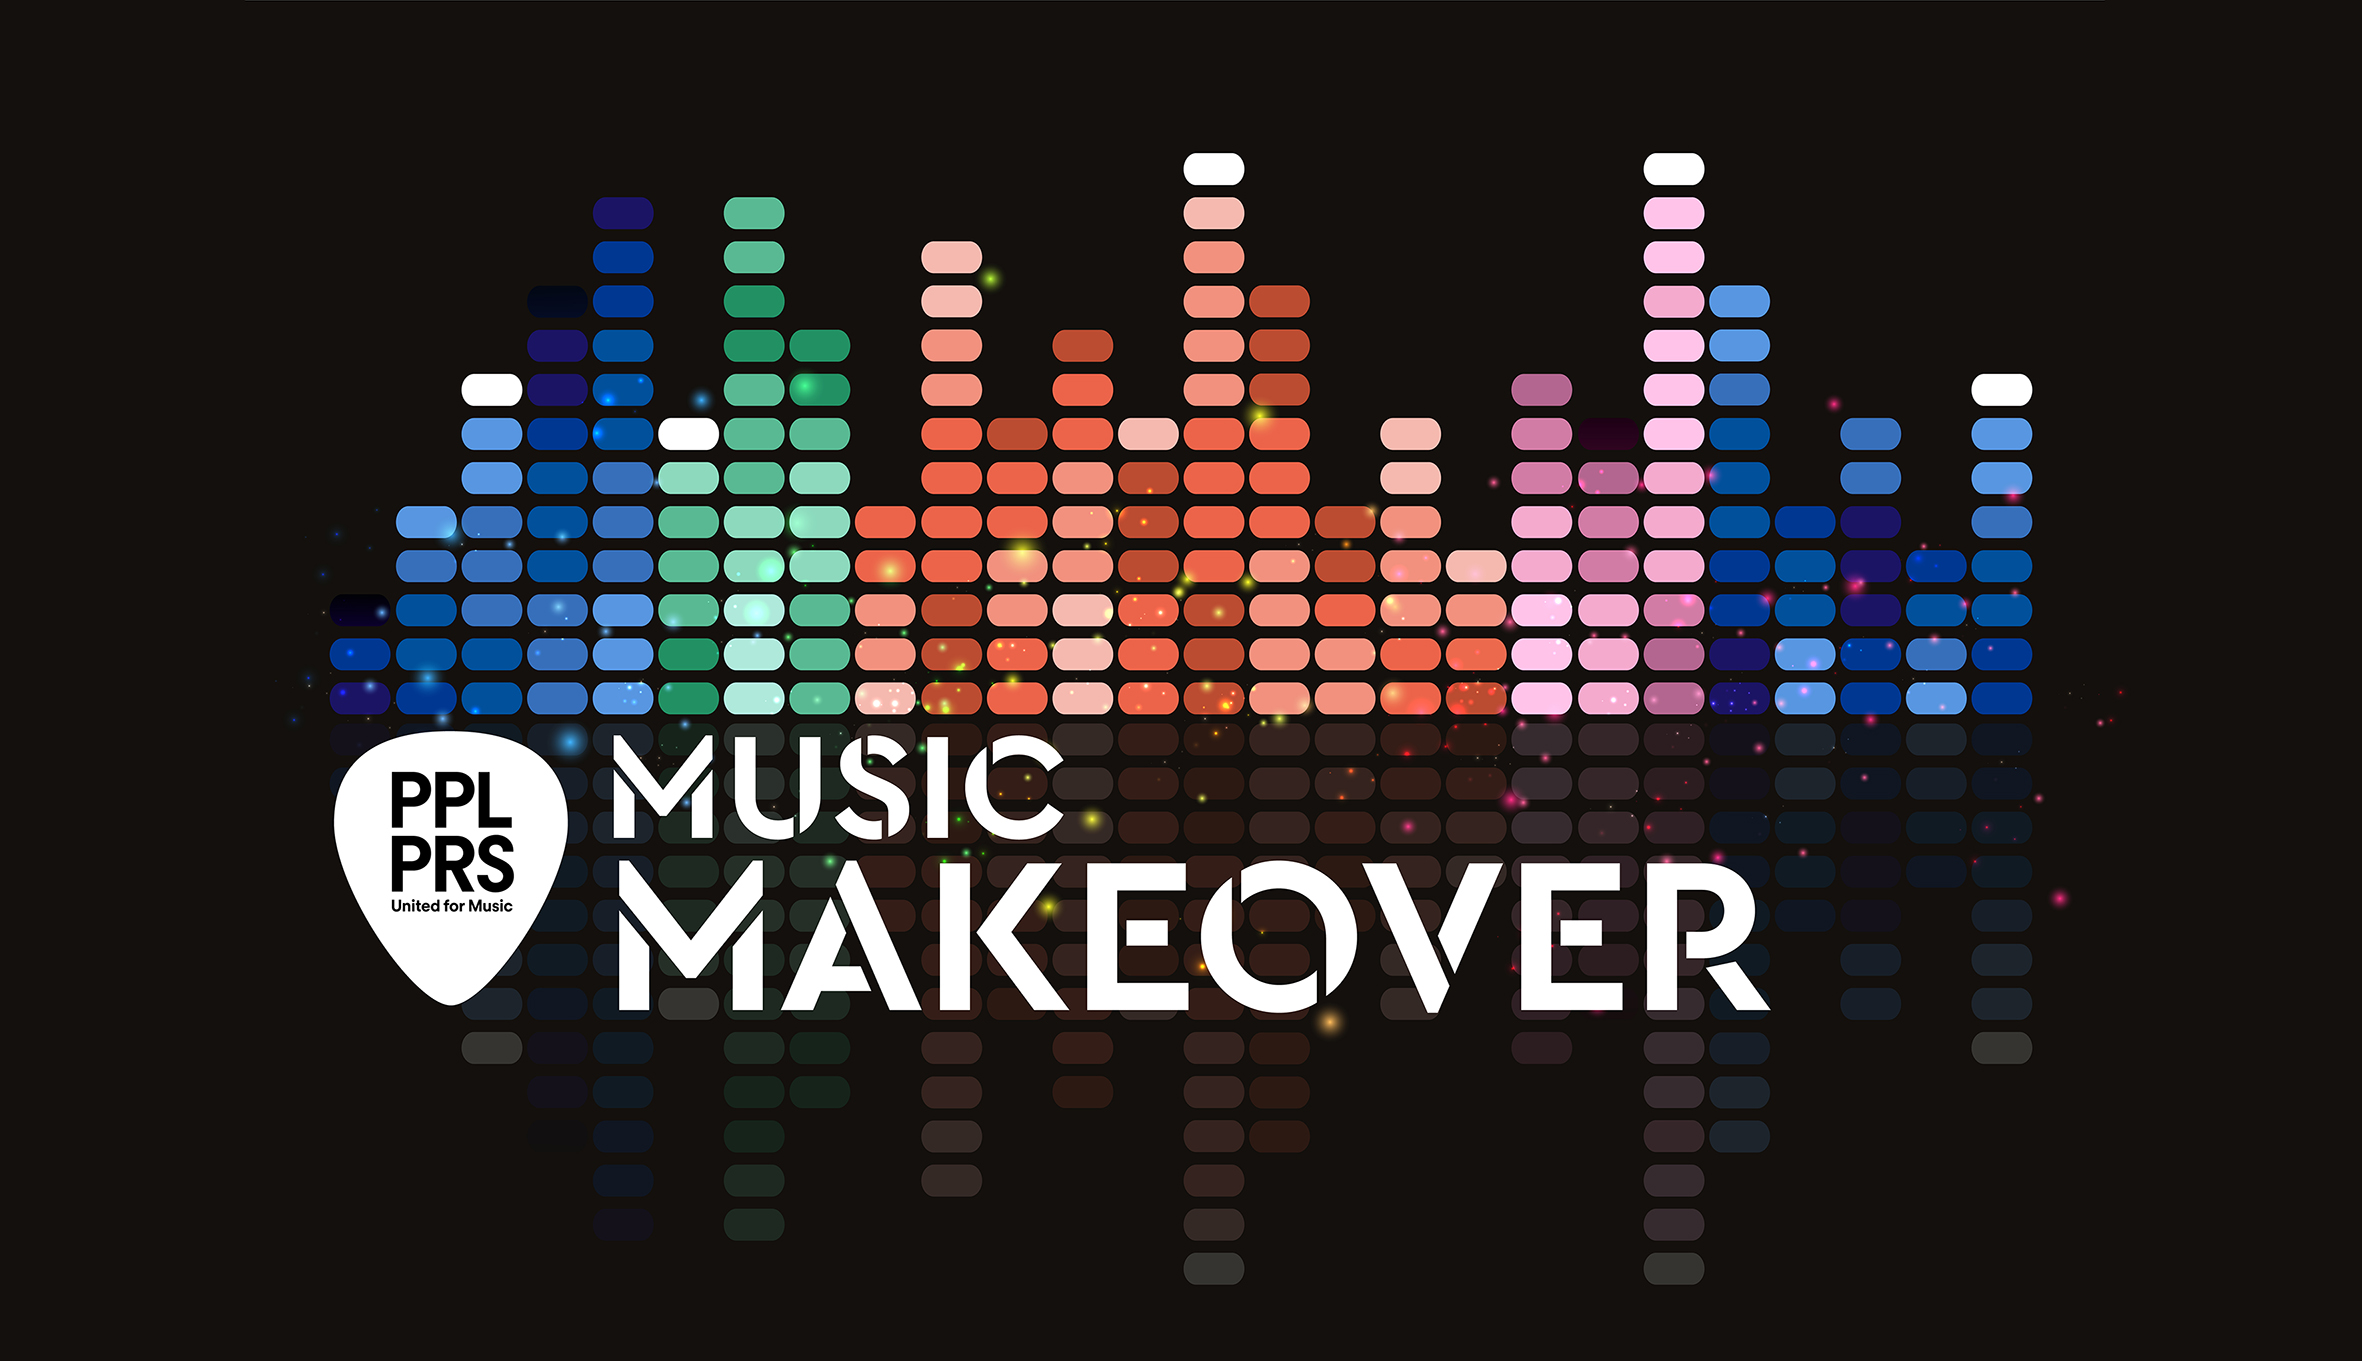 PPL PRS Music Makeover Competition